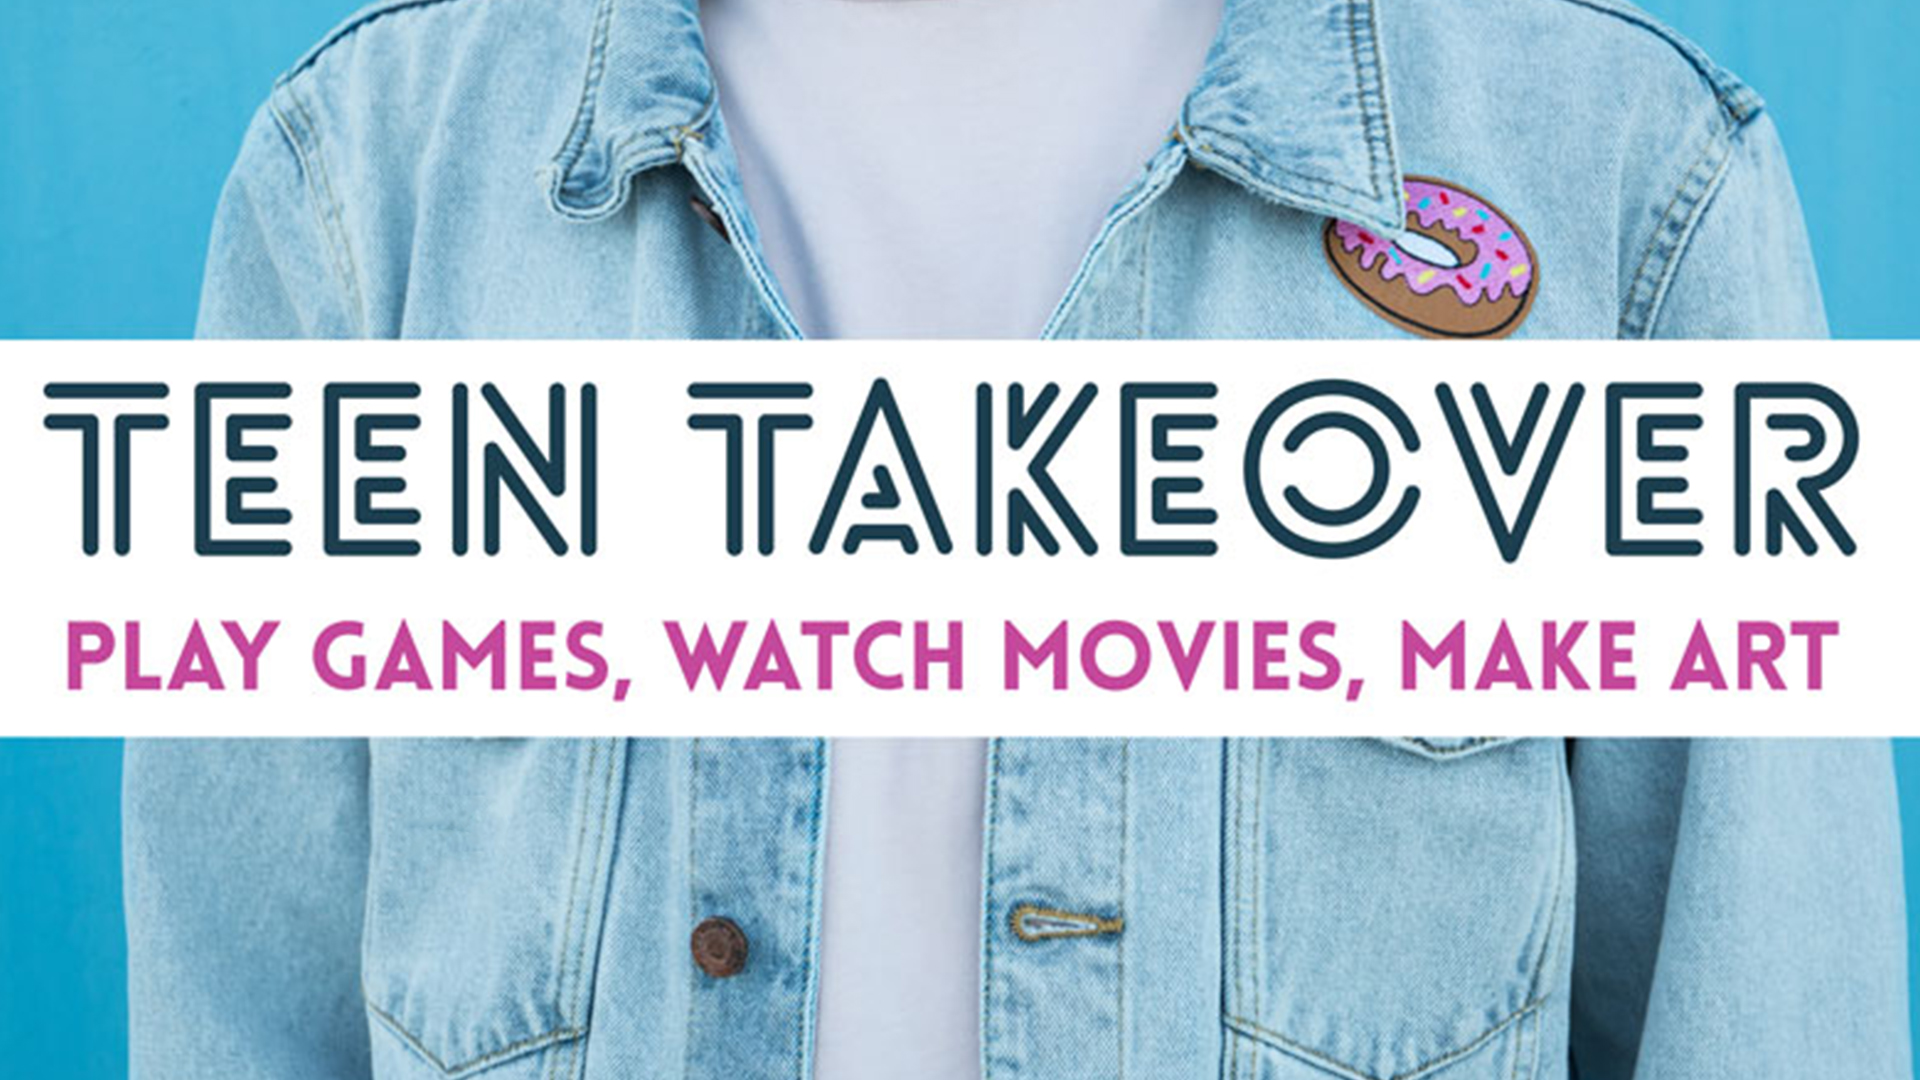 Person wearing jean jacket, with text that says "Teen Takeover, play games, watch movies, make art."